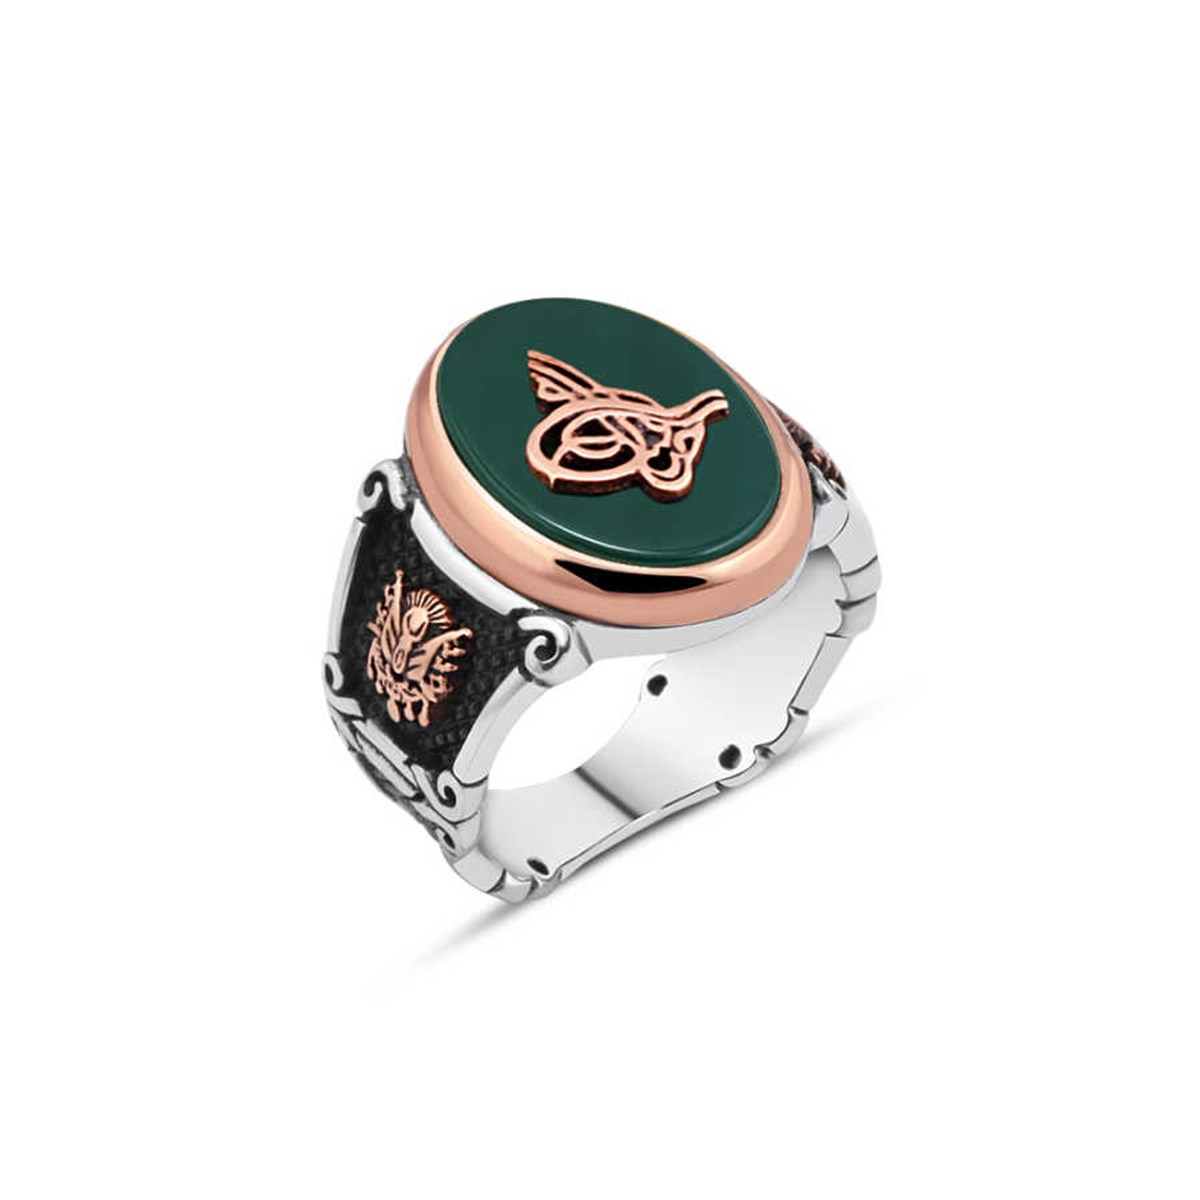 Silver Men's Ring with Tugra on Green Agate Stone